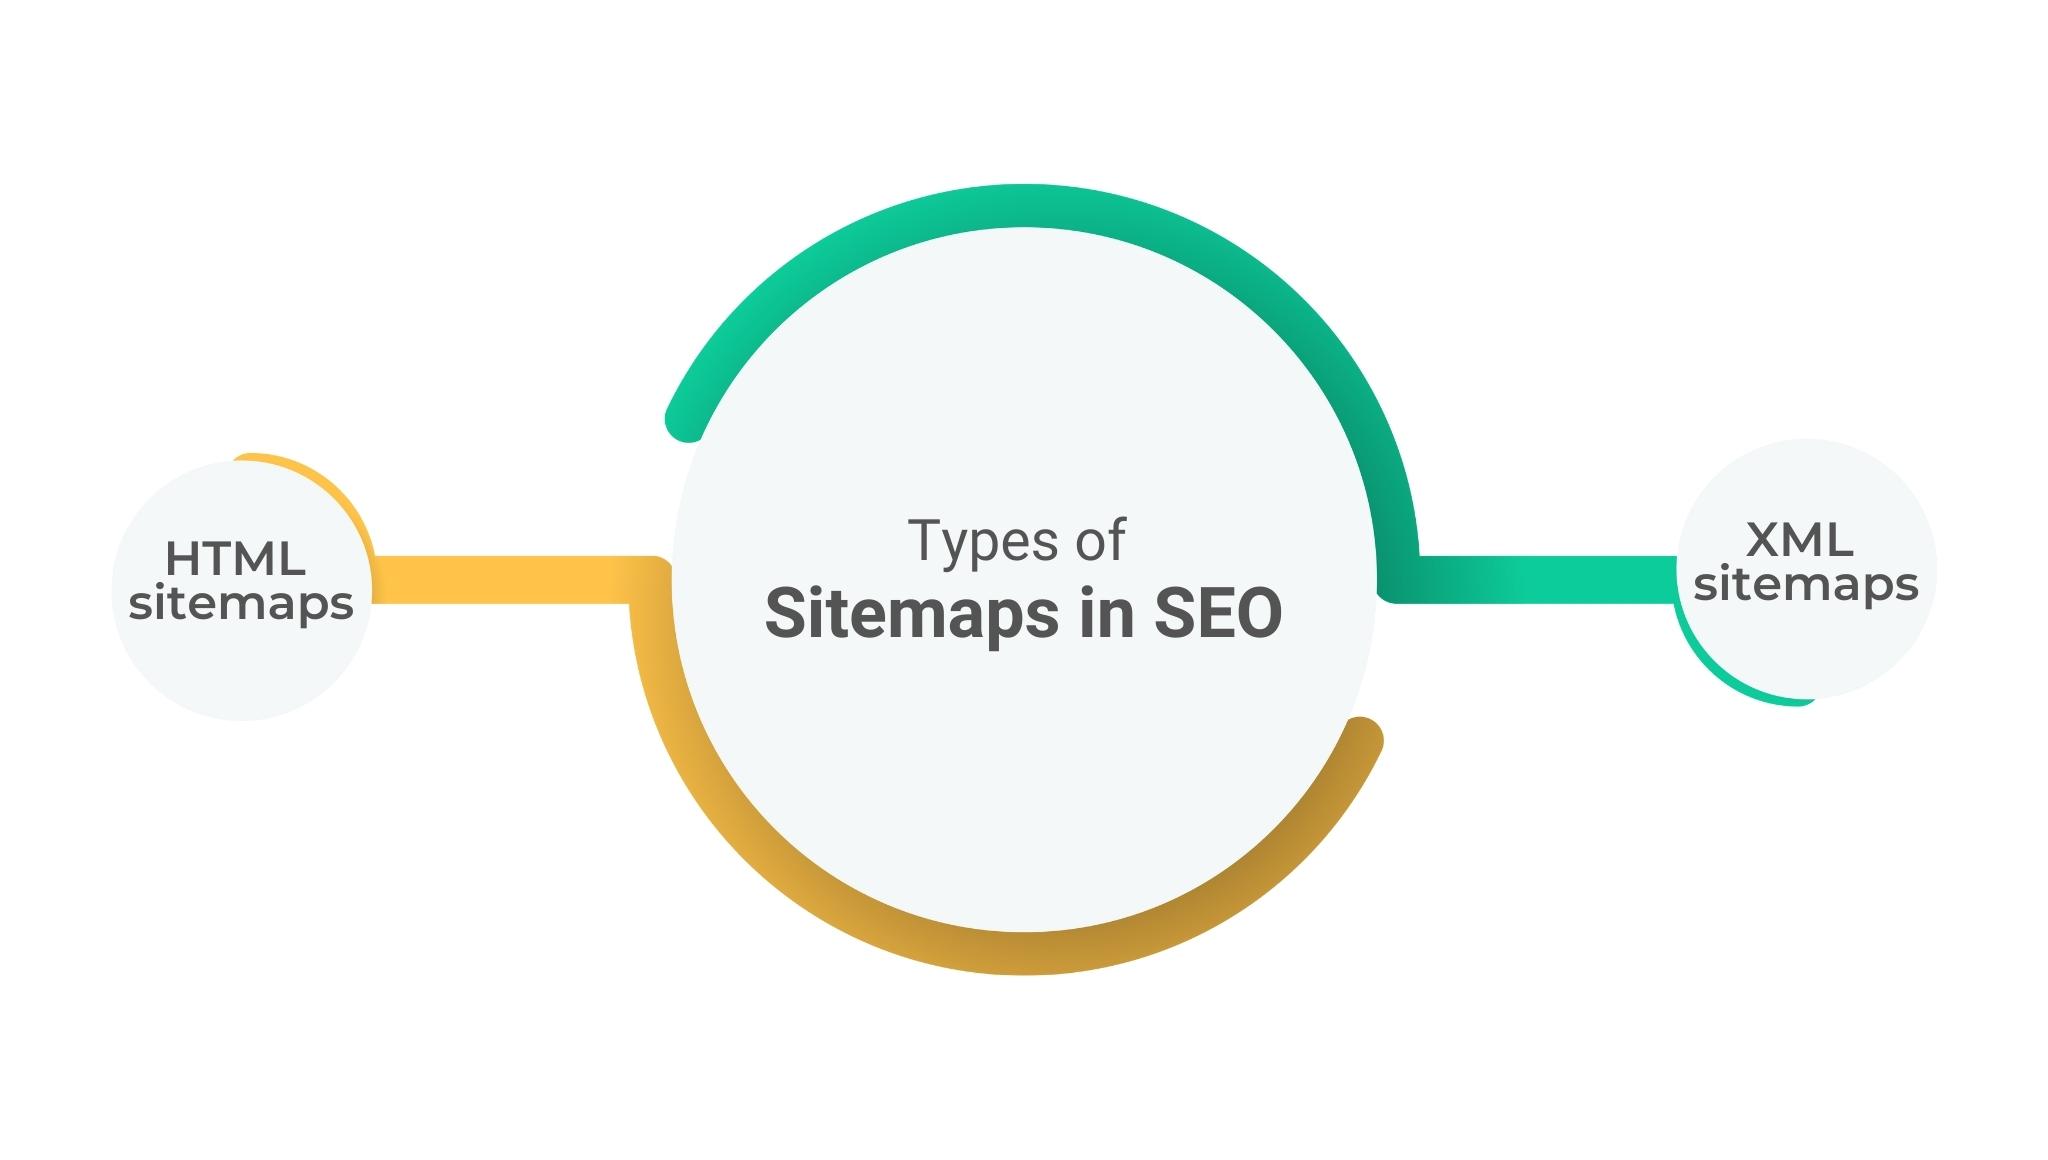 What are the Types of Sitemaps in SEO?